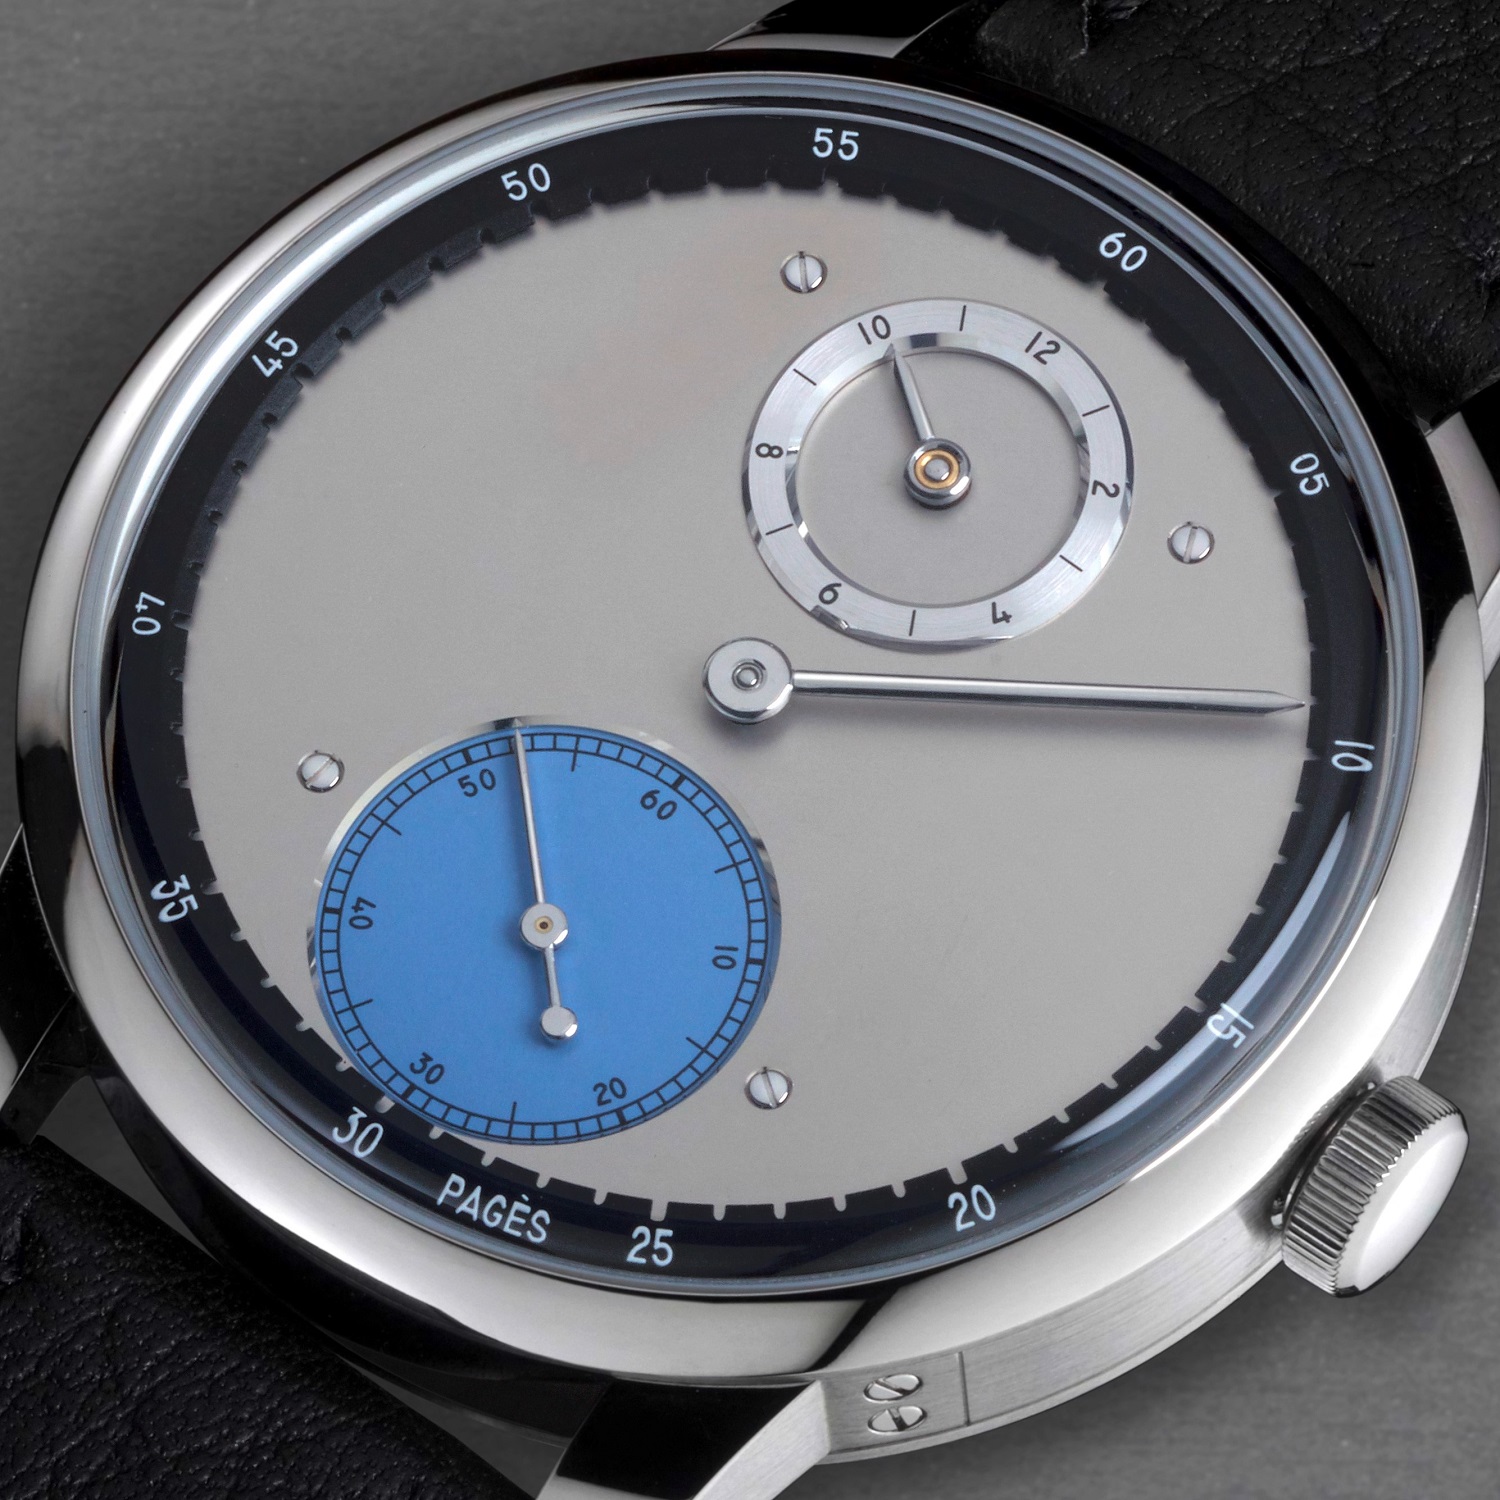 Regulator Watches - Raul Pages RP1